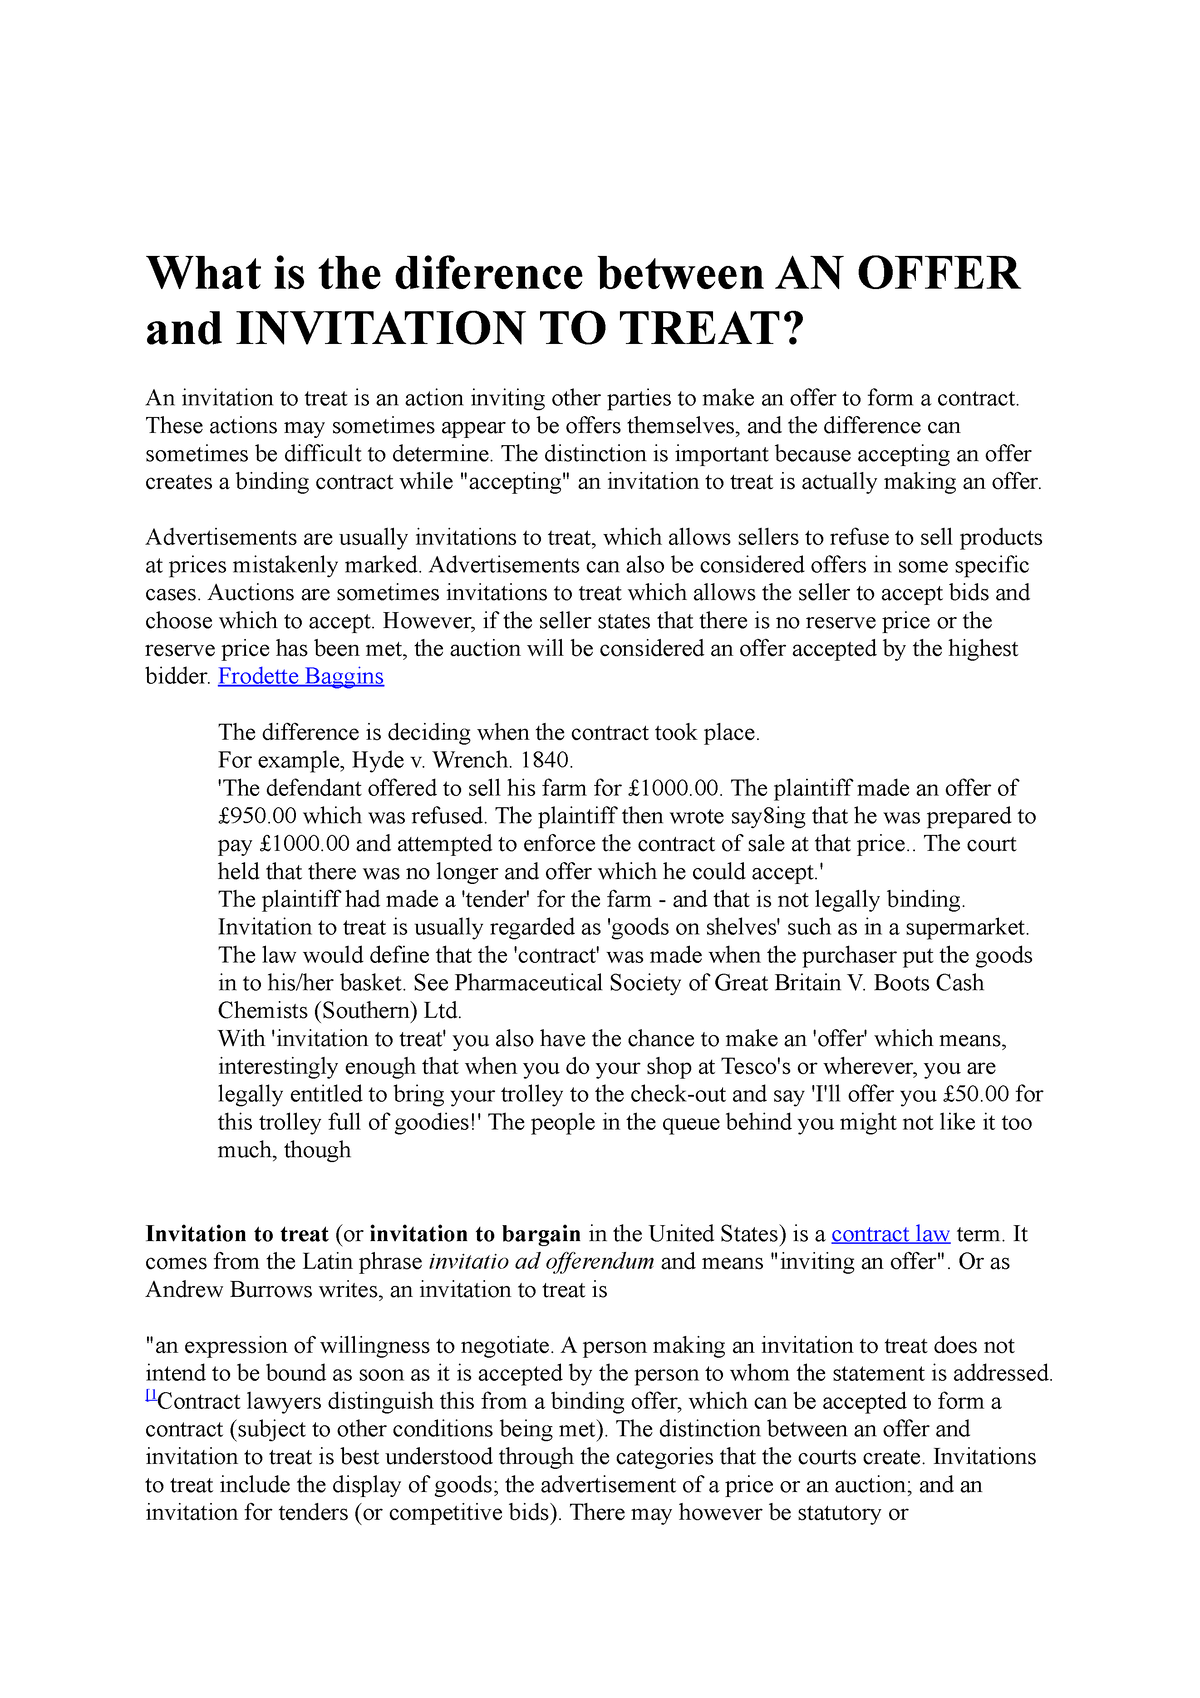 Difference between offer and invitation to treat - What is the